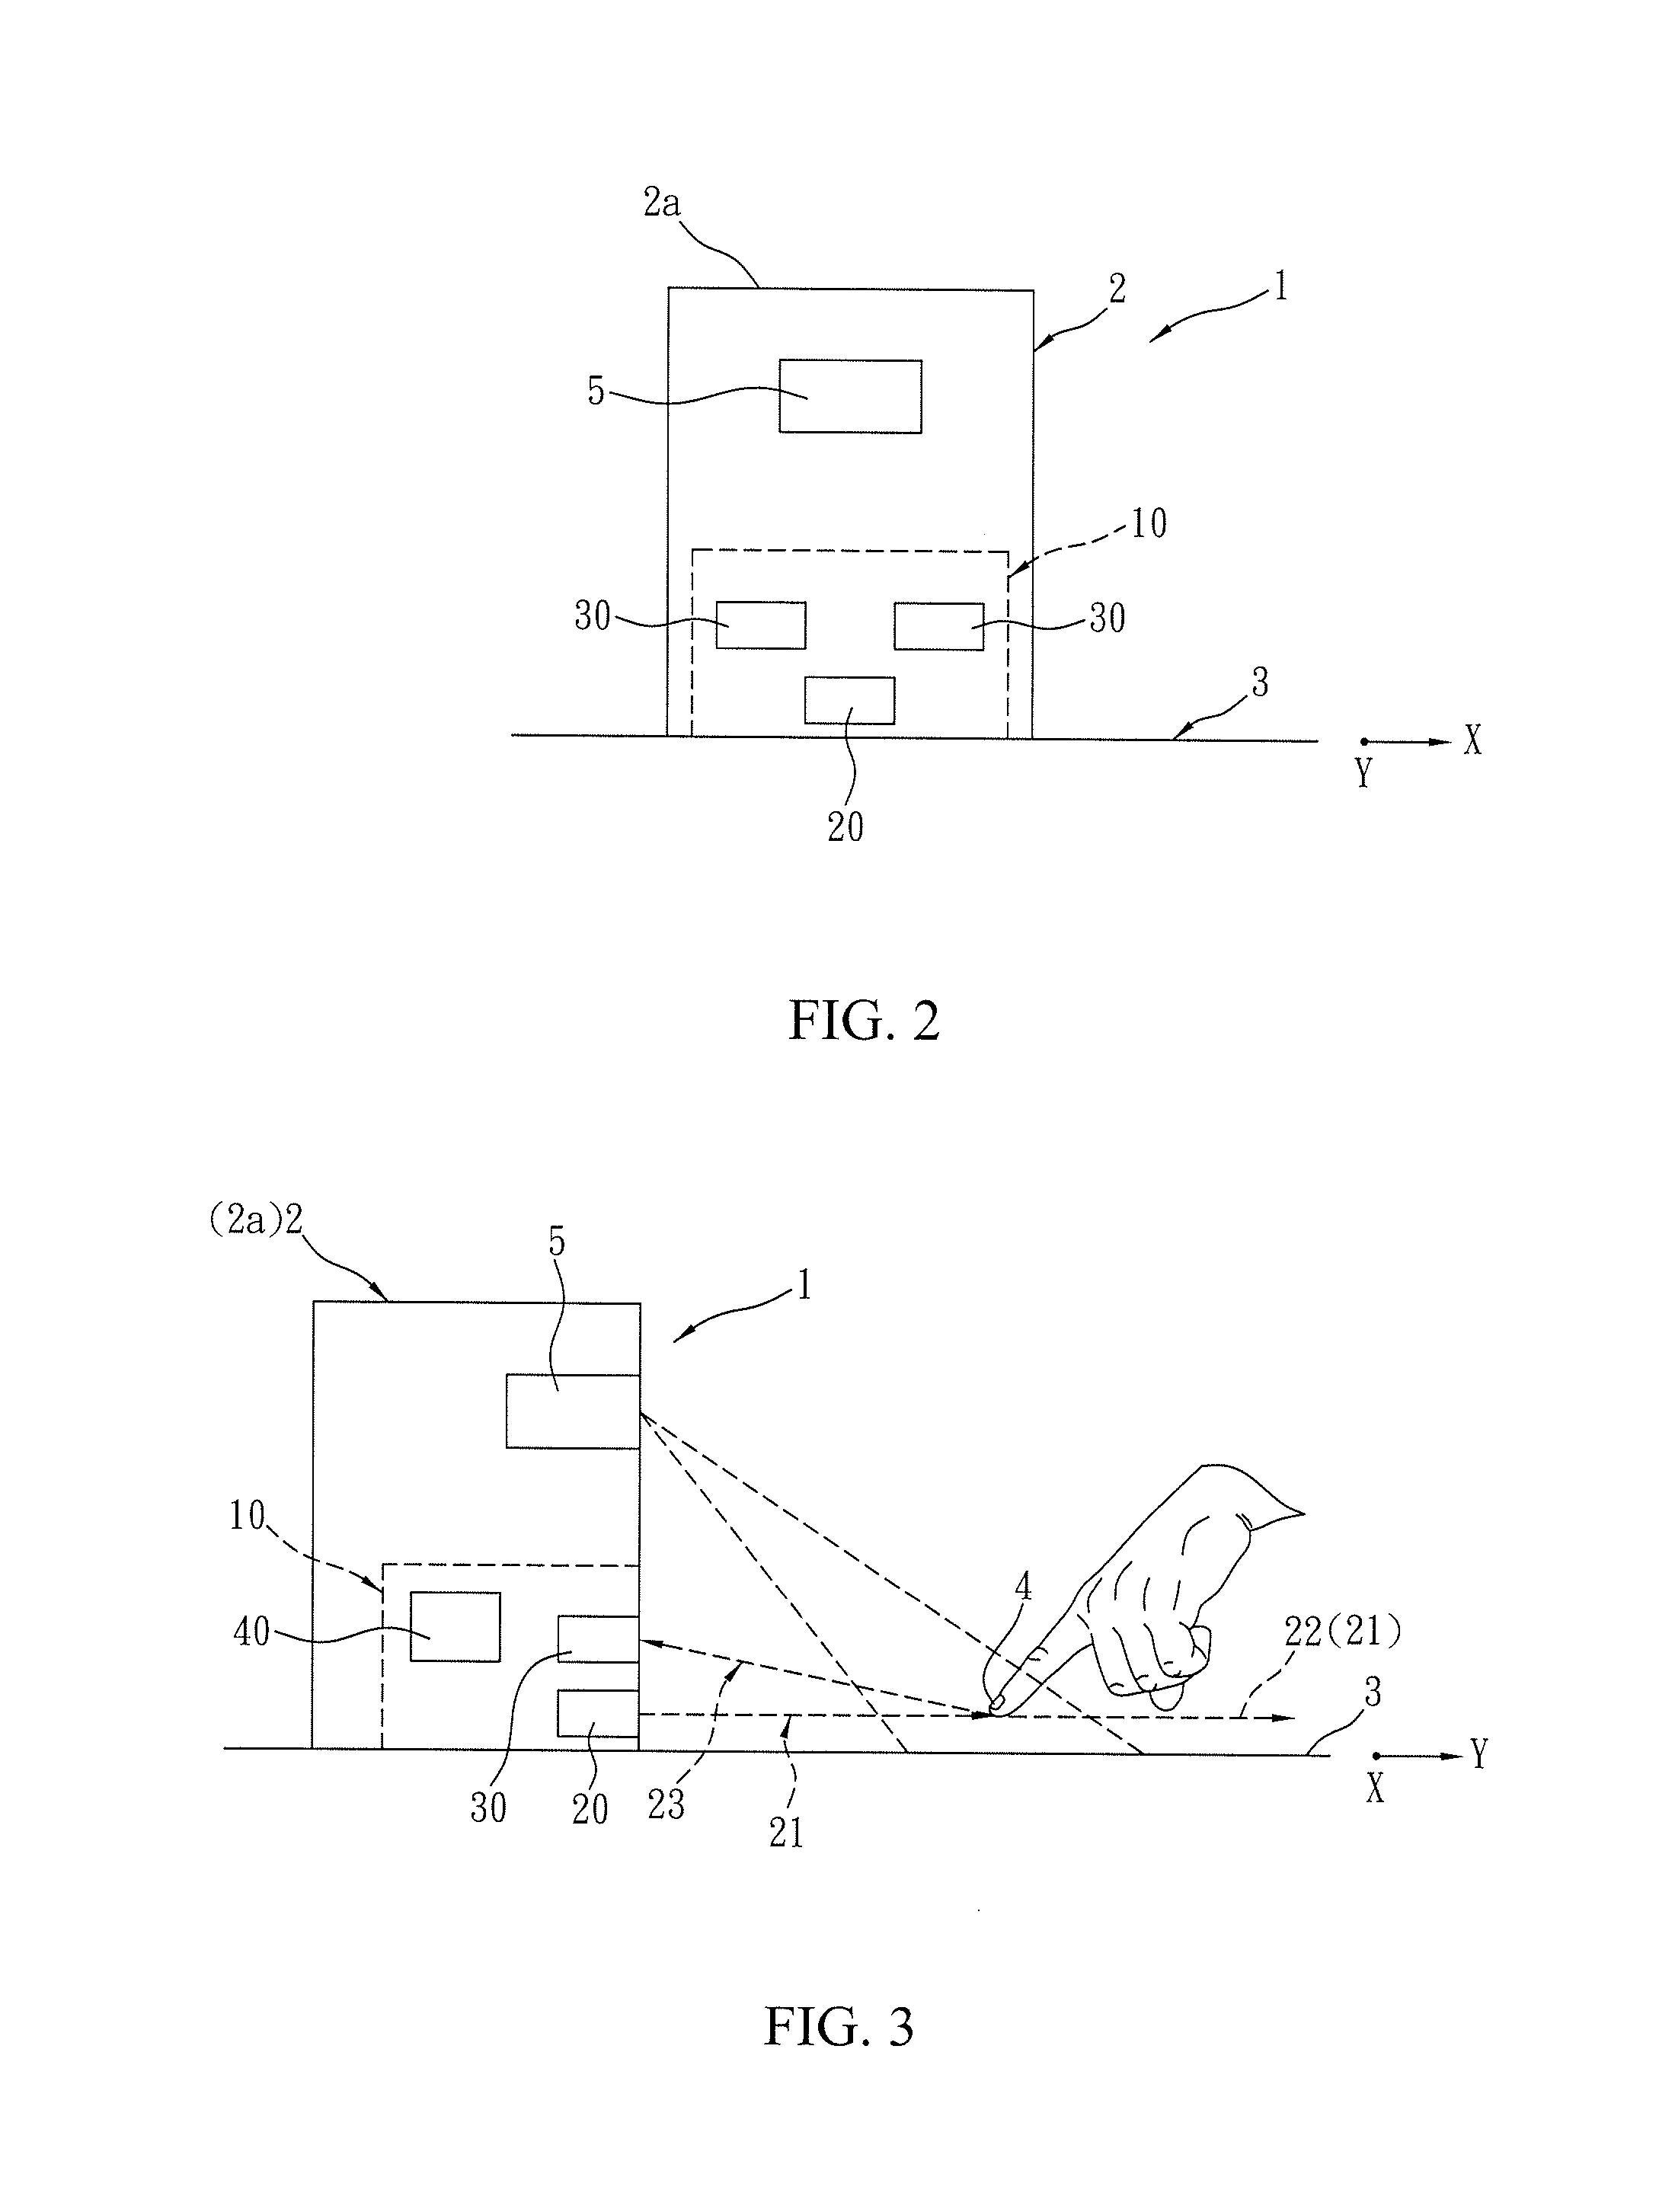 Virtual two-dimensional positioning module of input device and virtual device with the same